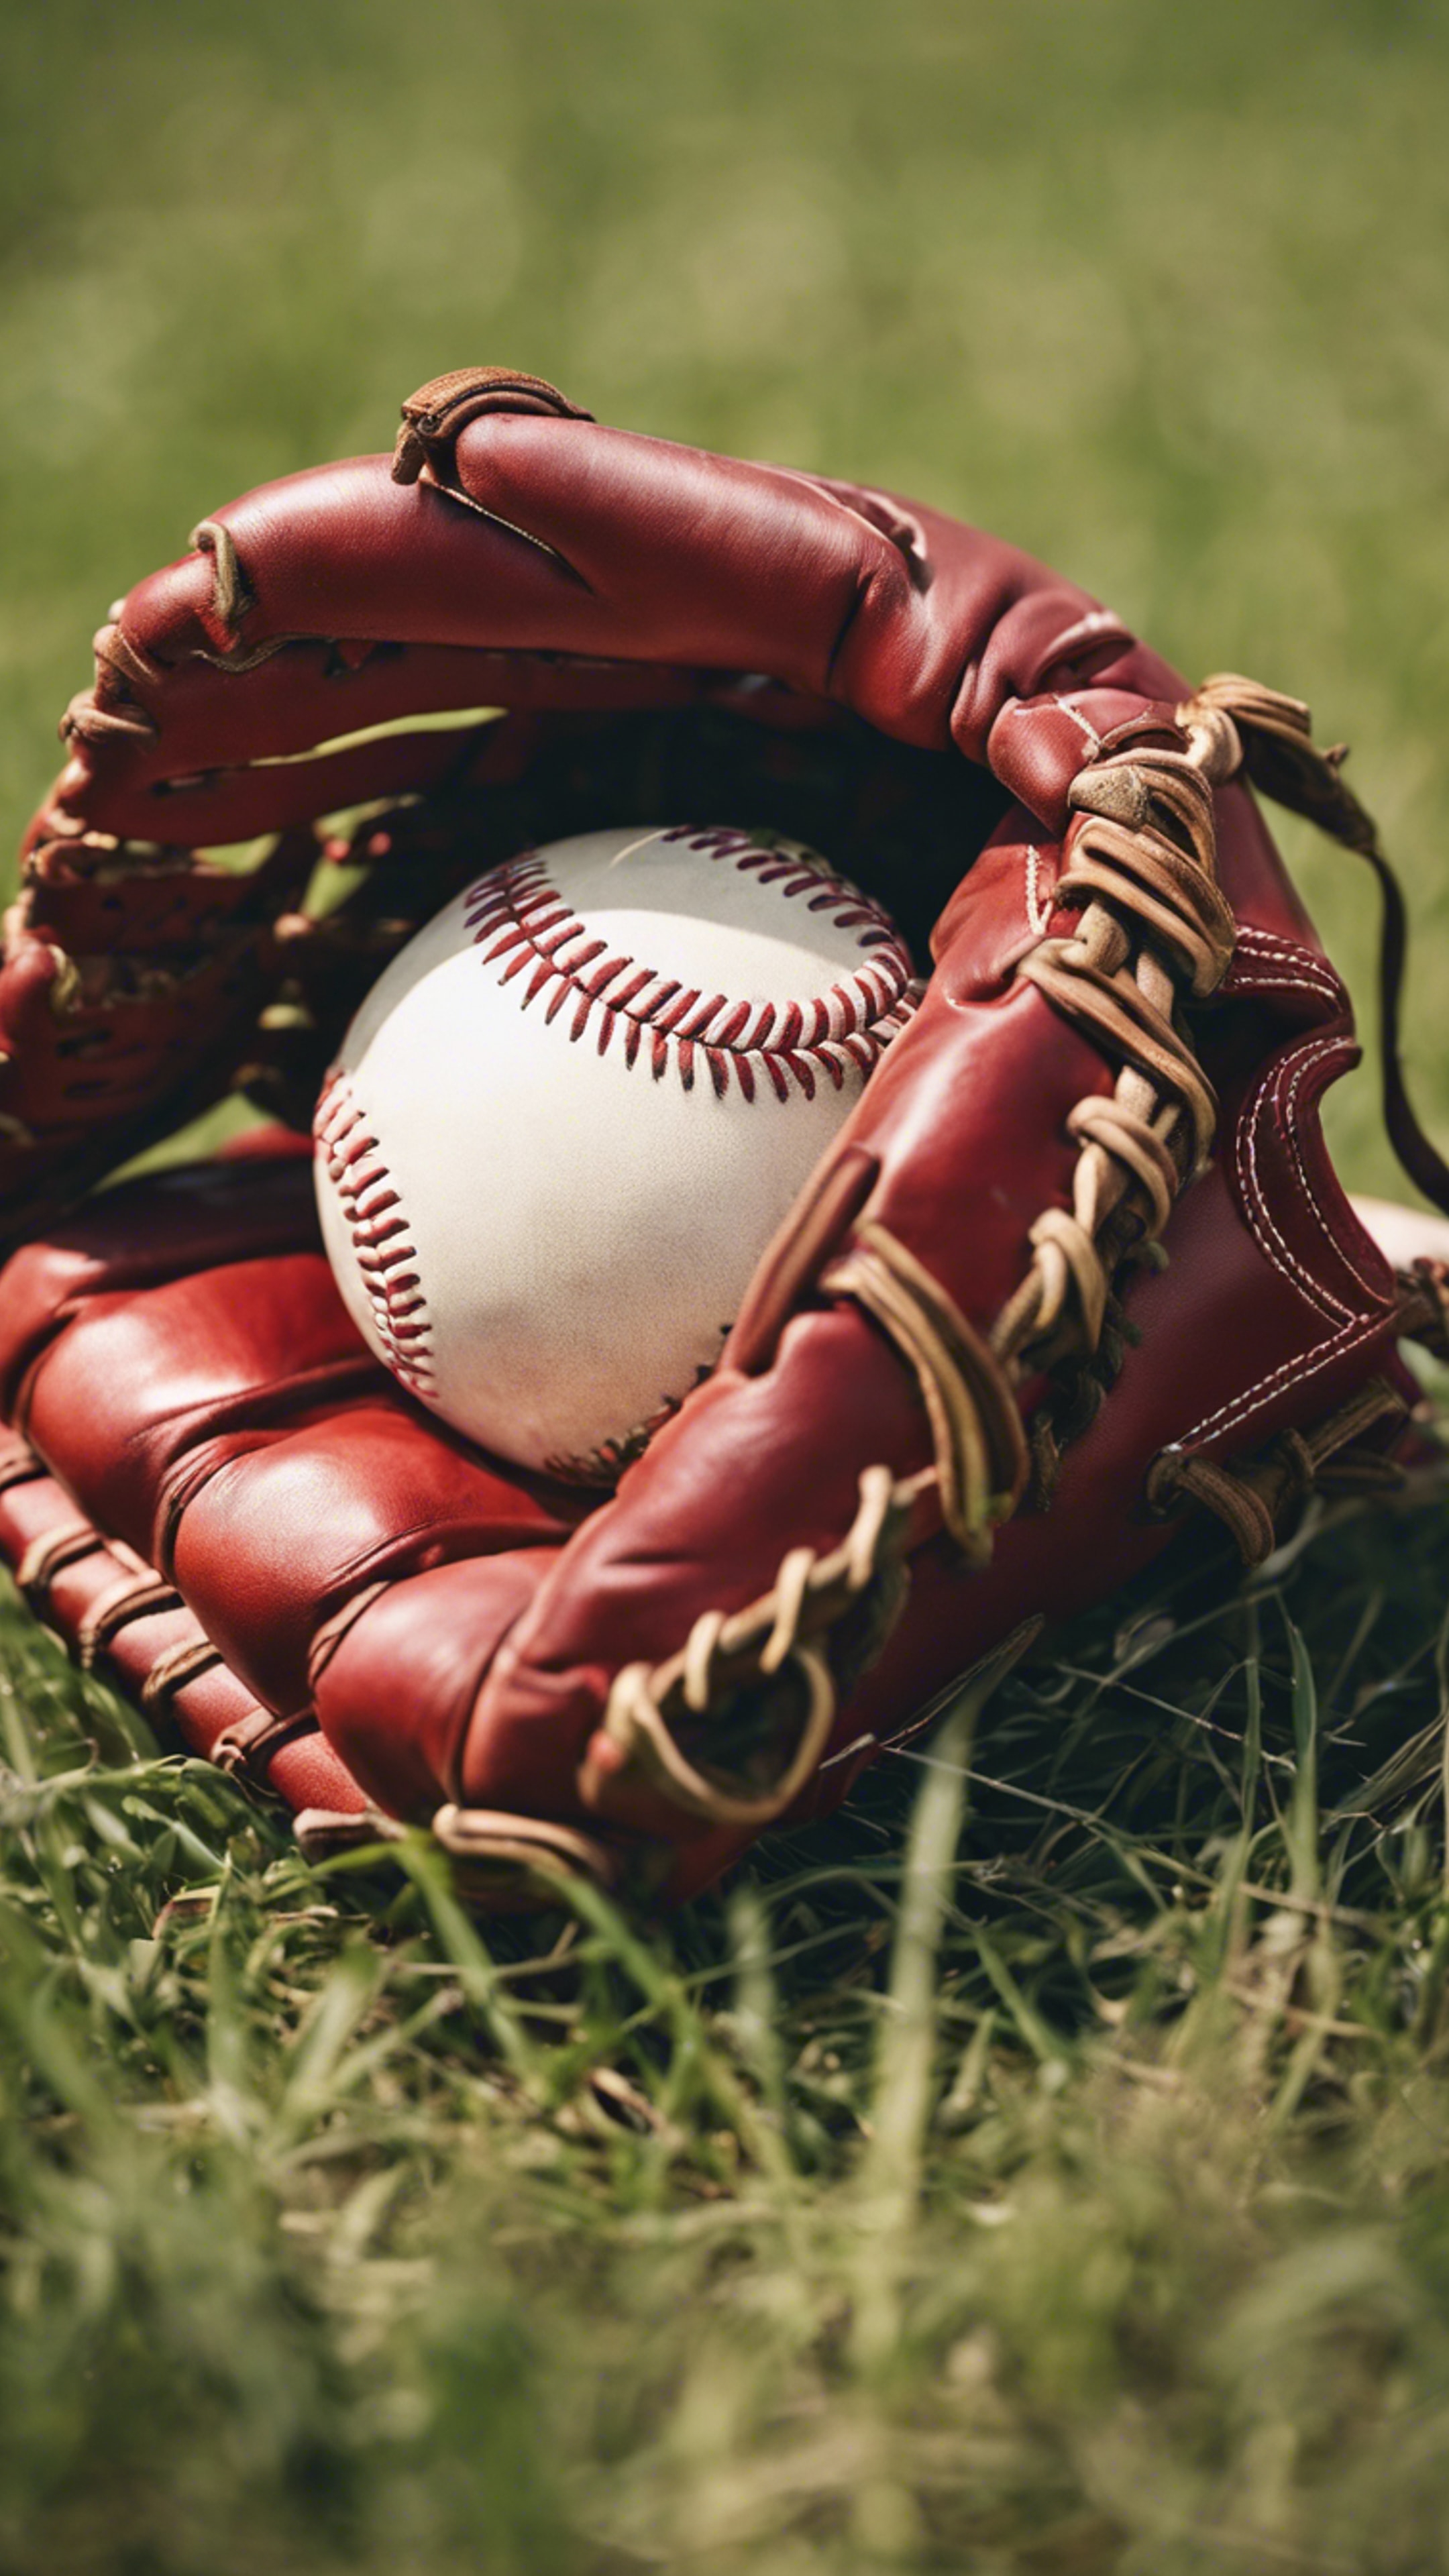 A striking red leather baseball glove on a grassy field right after a game. Tapetai[10102f7c198241d6b5bd]